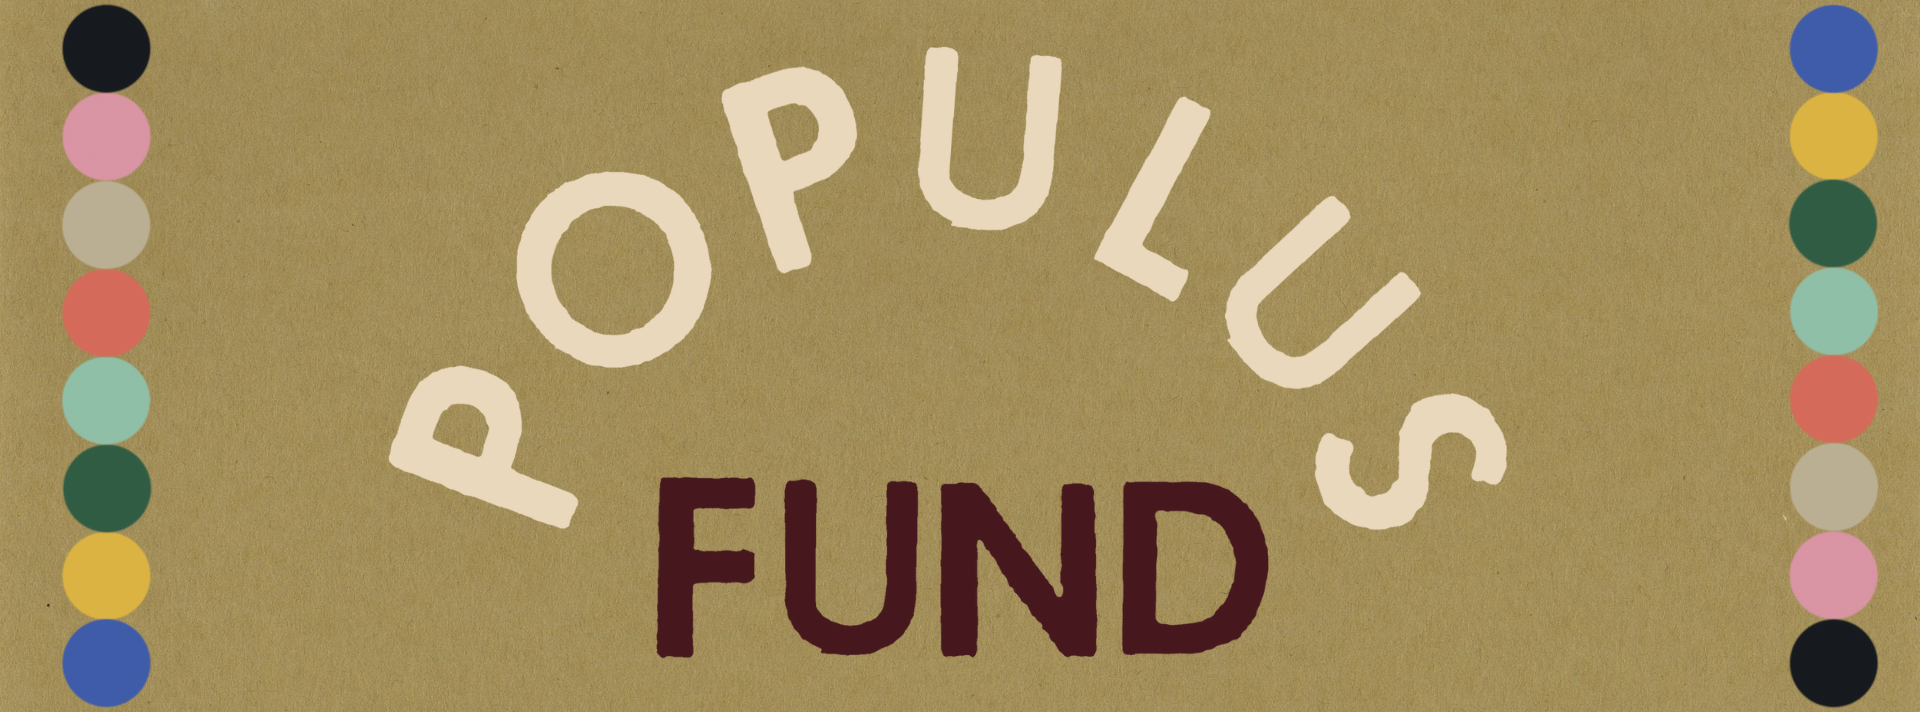 Populus Fund logo against a tan background with colorful dots along the margins